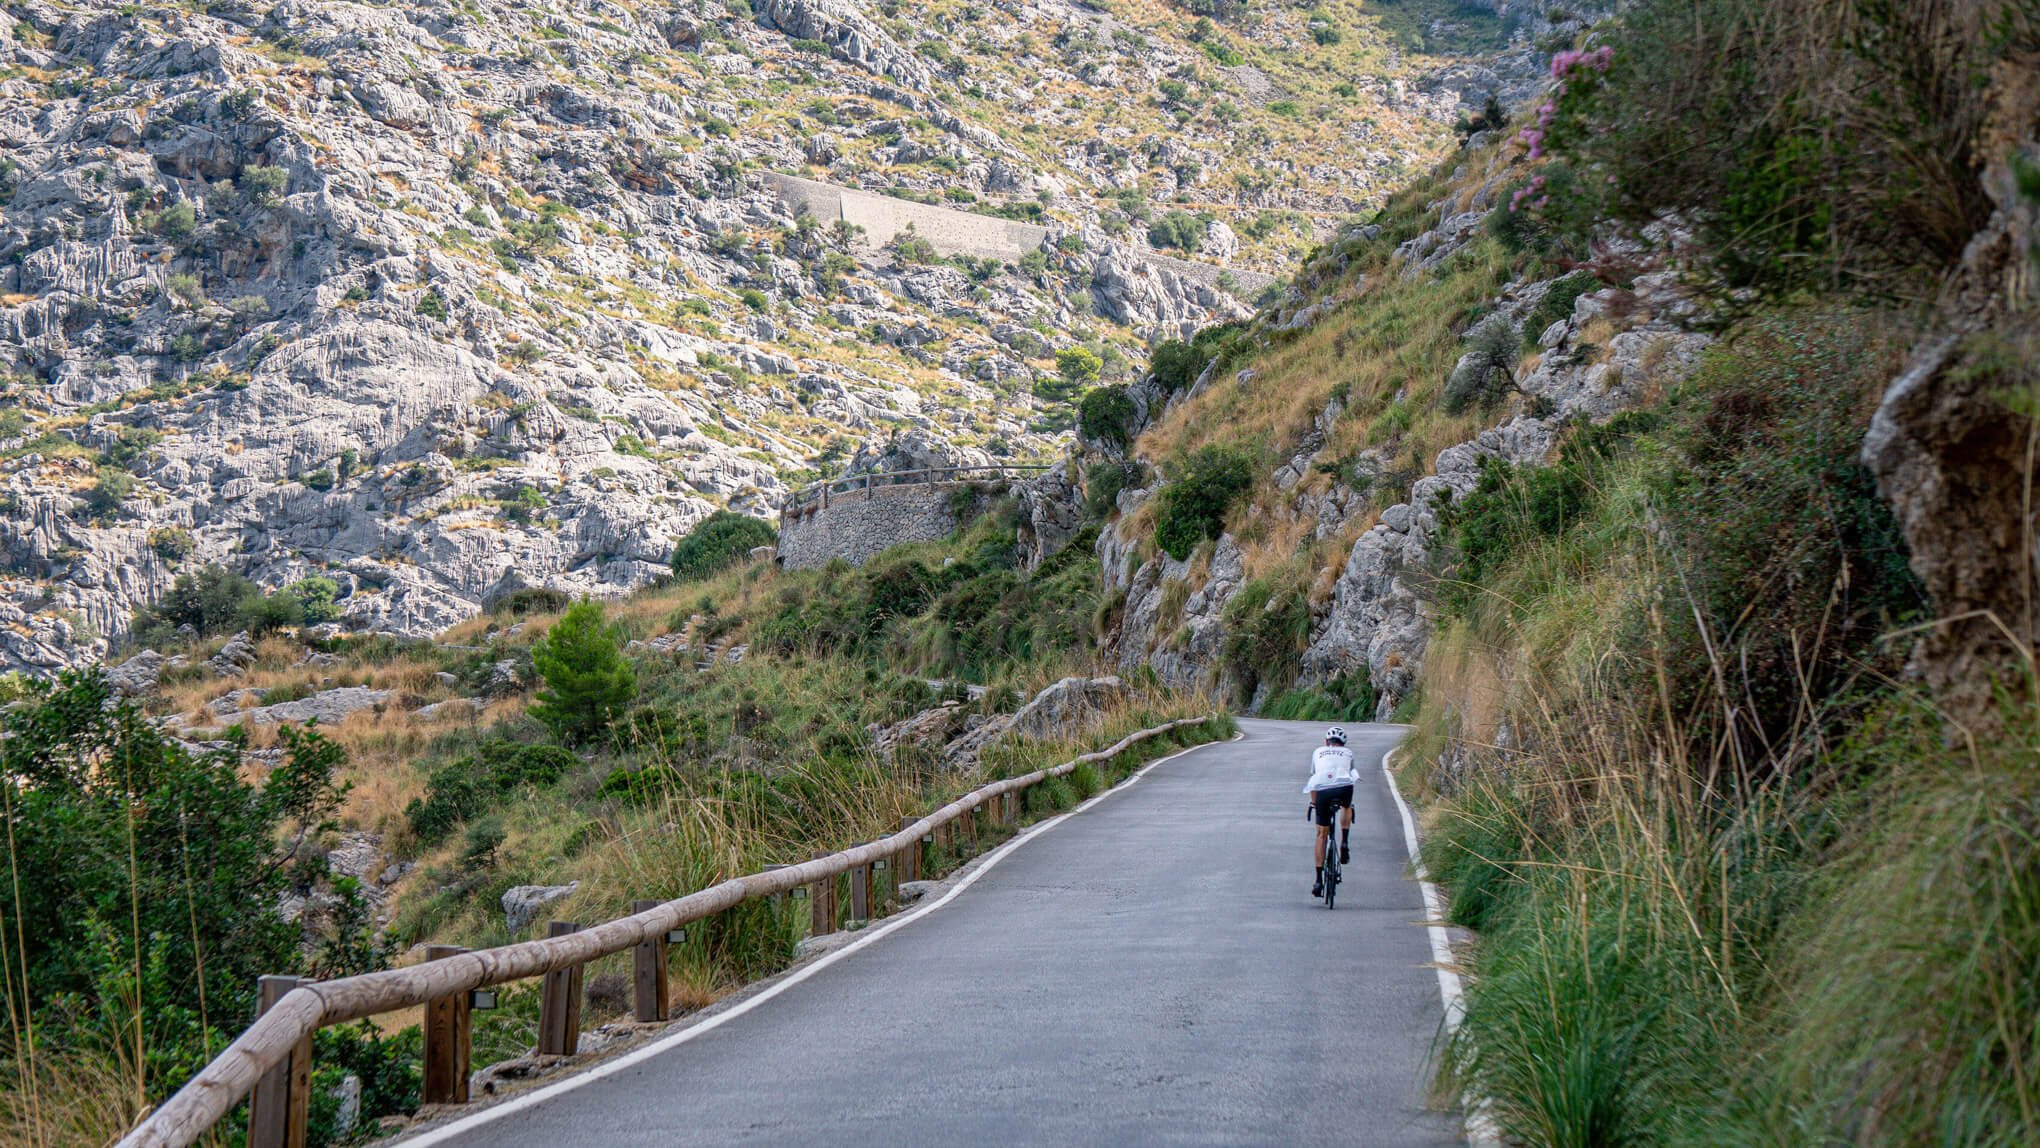 Sa Calobra Uhill is challenging, but it's a great achievement in your portfolio